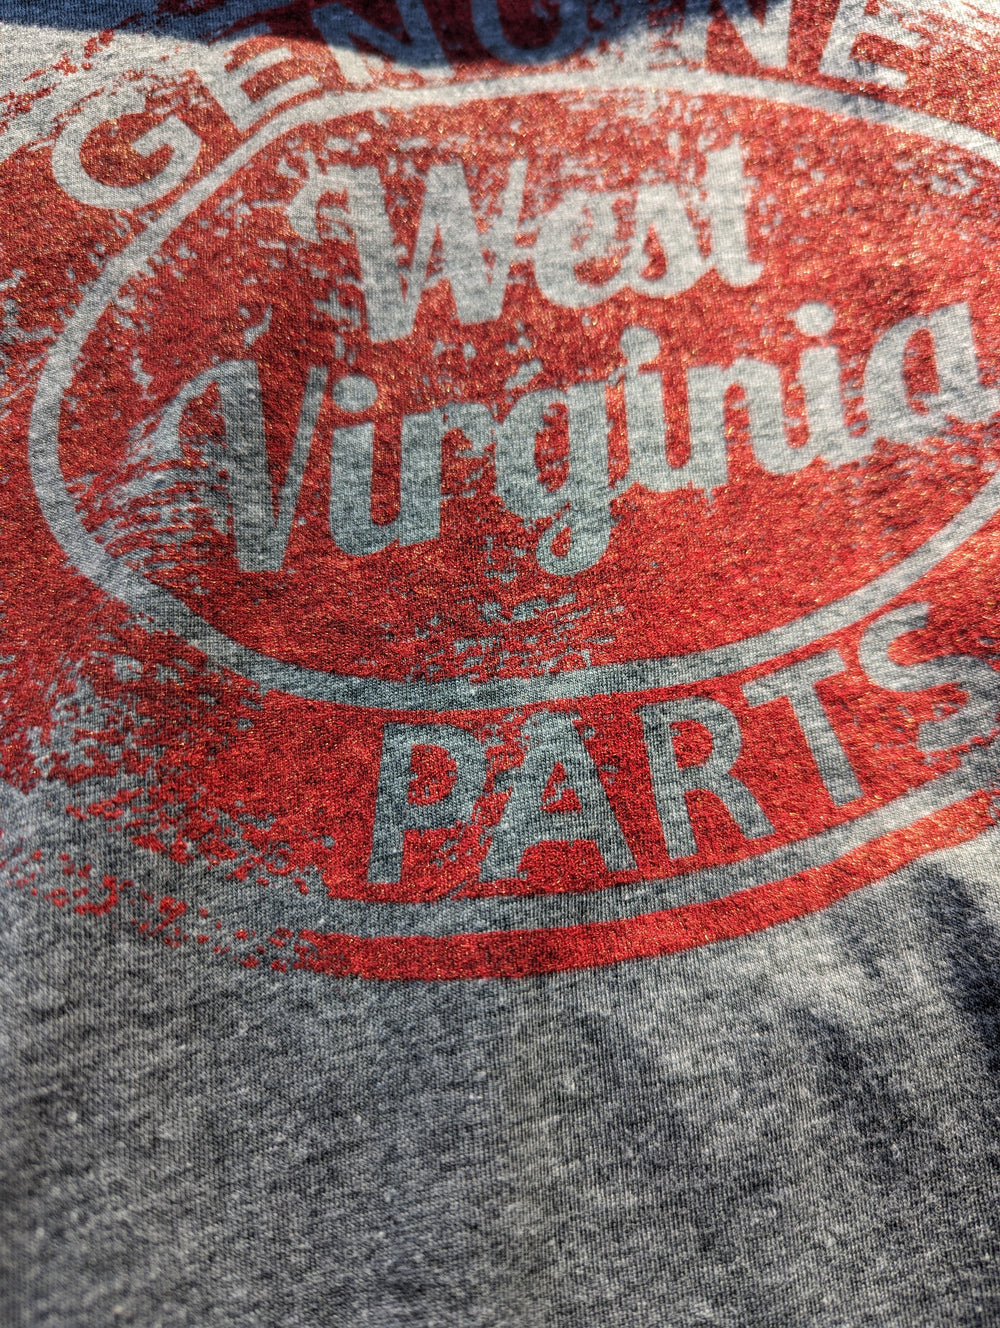 a close up of the screenprinted logo on the garage tee